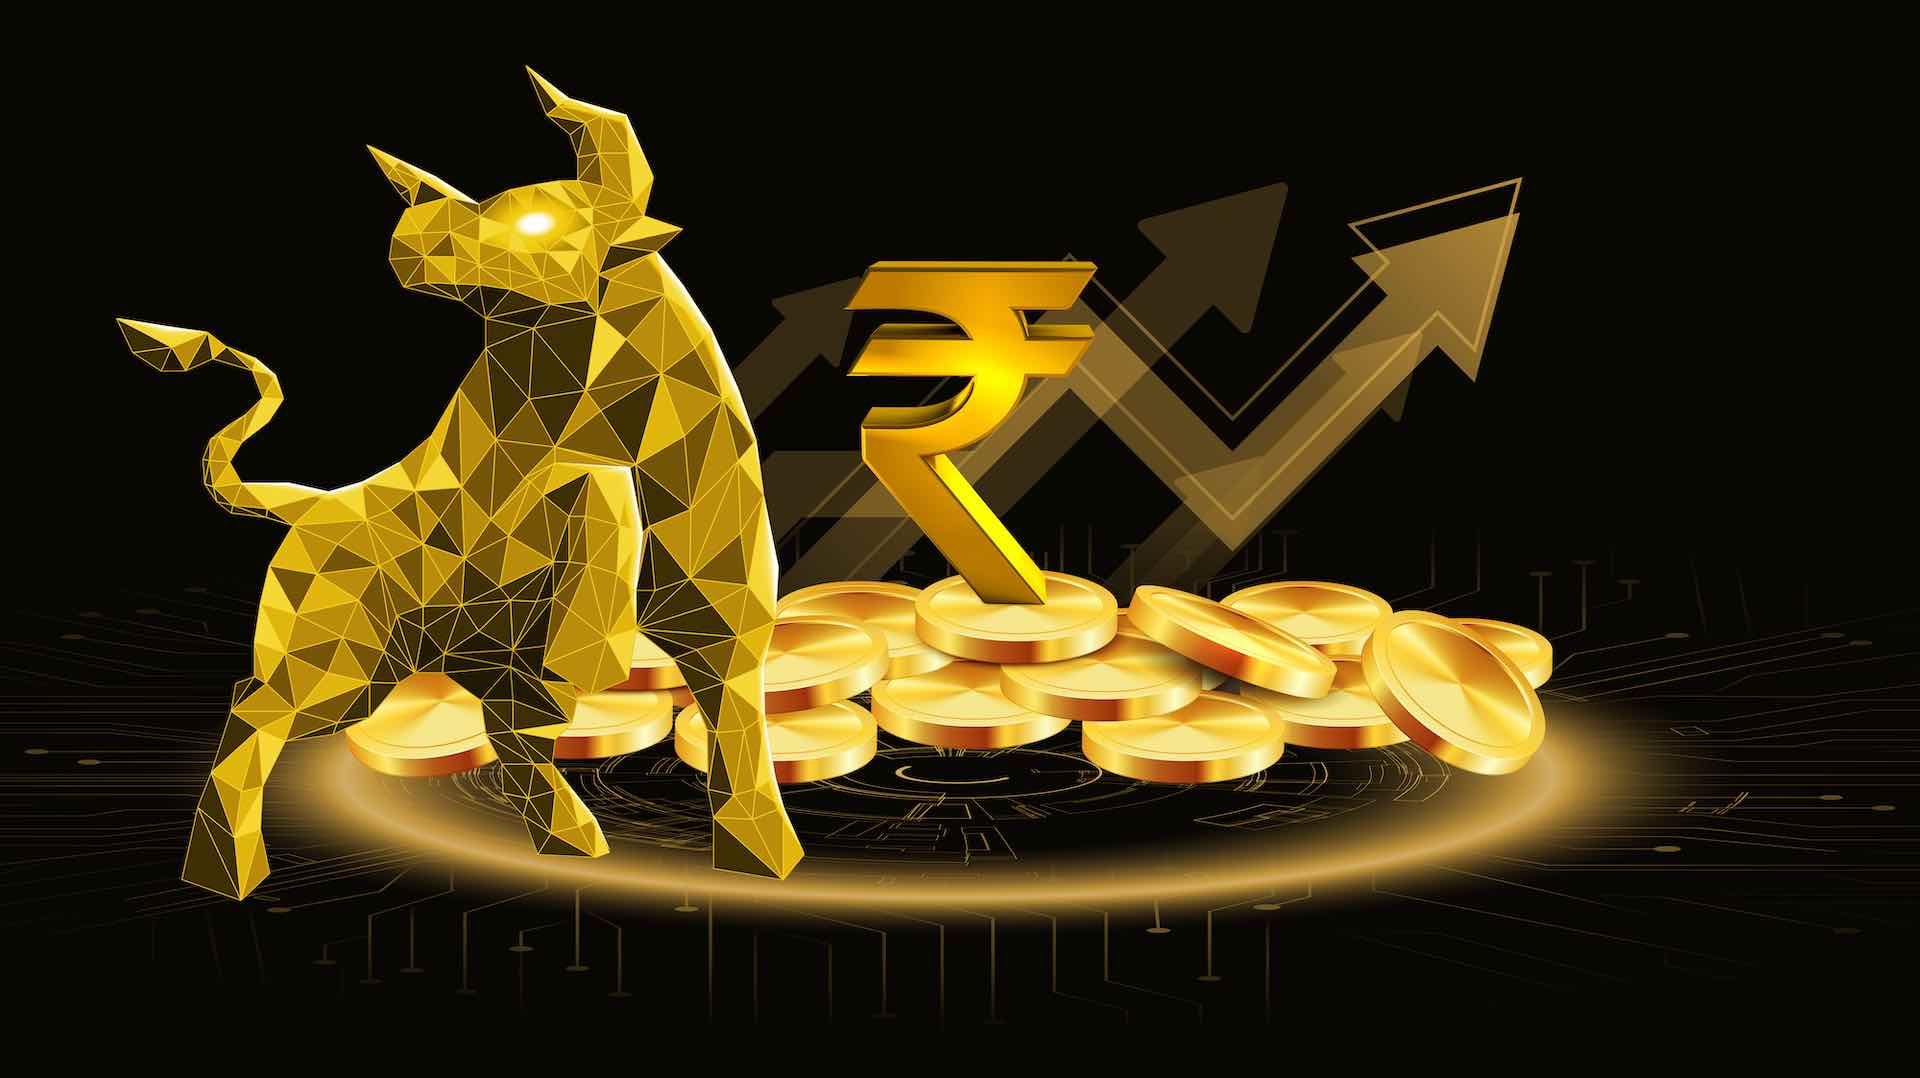 Indian authorities show openness to regulating cryptocurrency